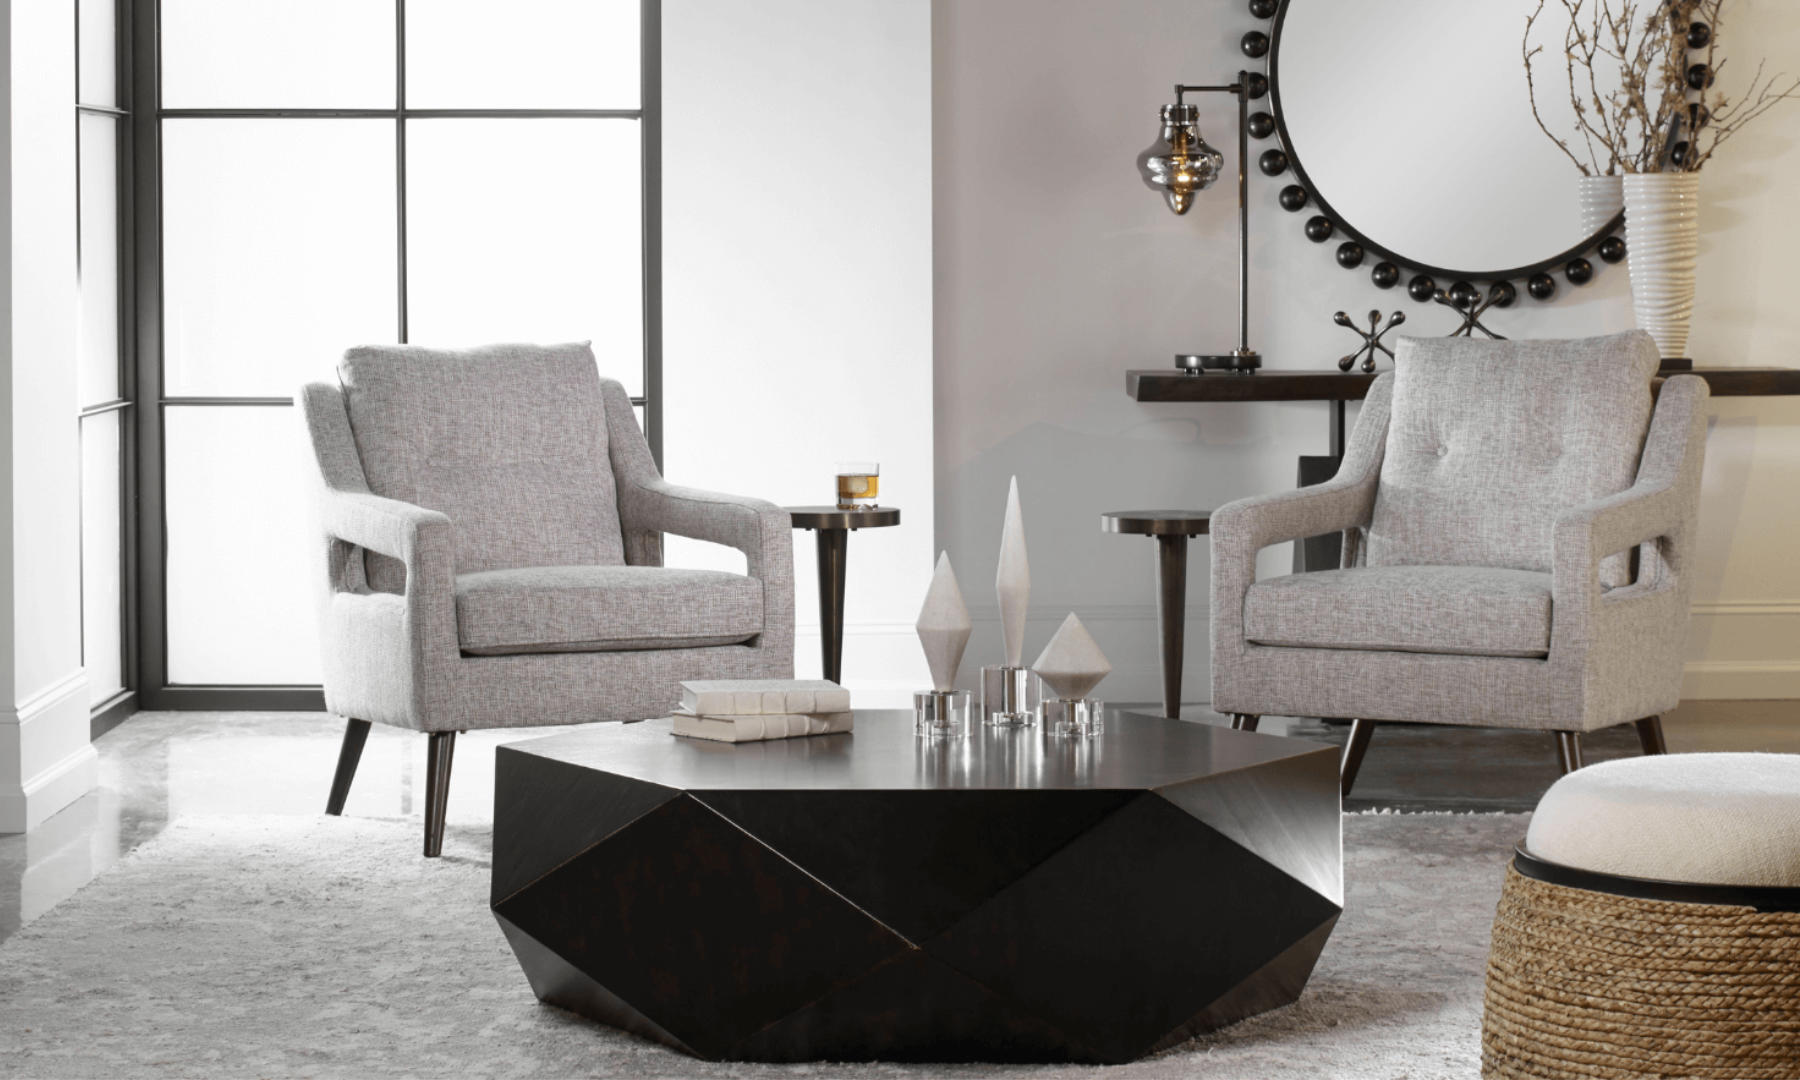 A modern living room, with two accent chairs, a minimalistic coffee table, and a beautiful white/grey rug